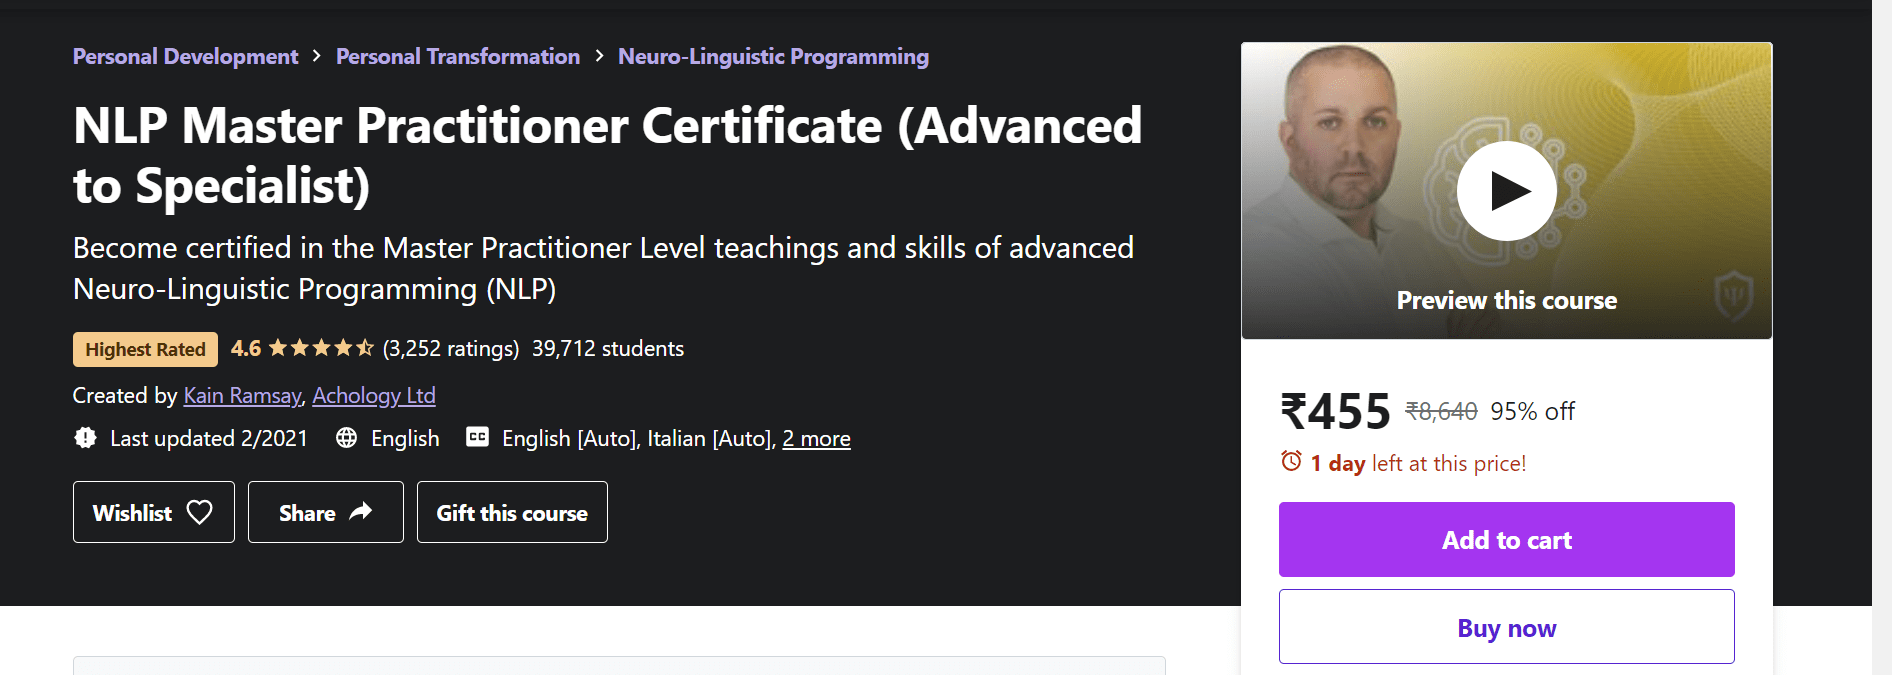 Best Best NLP Training Courses - NLP Master Practitioner Certificate (Advance to Specialist)